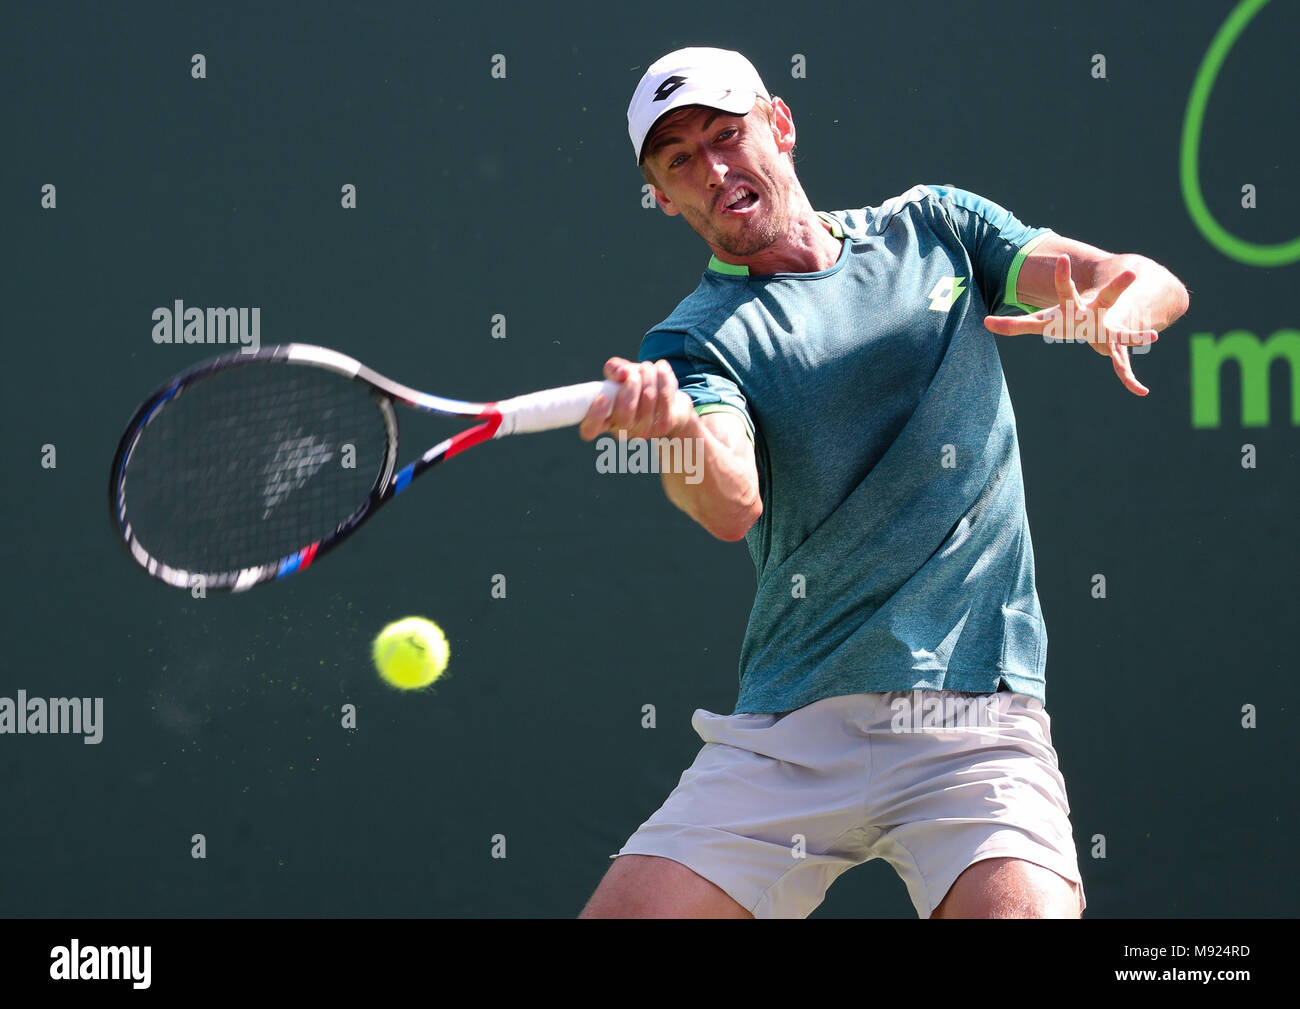 Key Biscayne, Florida, USA. 21st Mar, 2018. John Millman from Australia  plays a forehand against Peter Gojowczyk from Germany during a first round  of the 2018 Miami Open presented by Itau professional